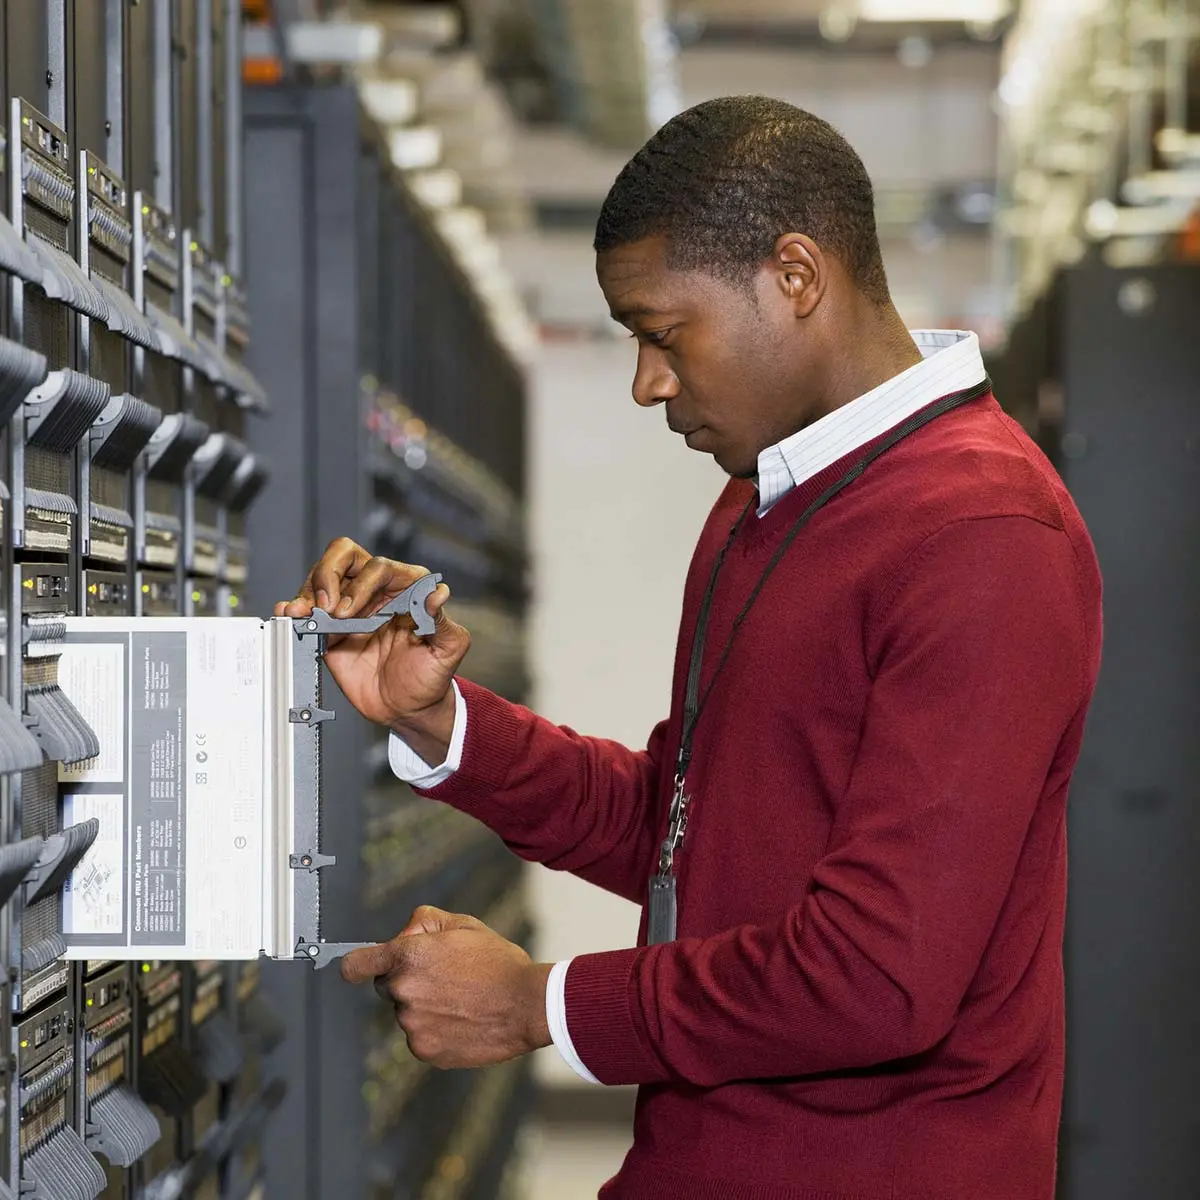 IT worker in red sweater removing a server